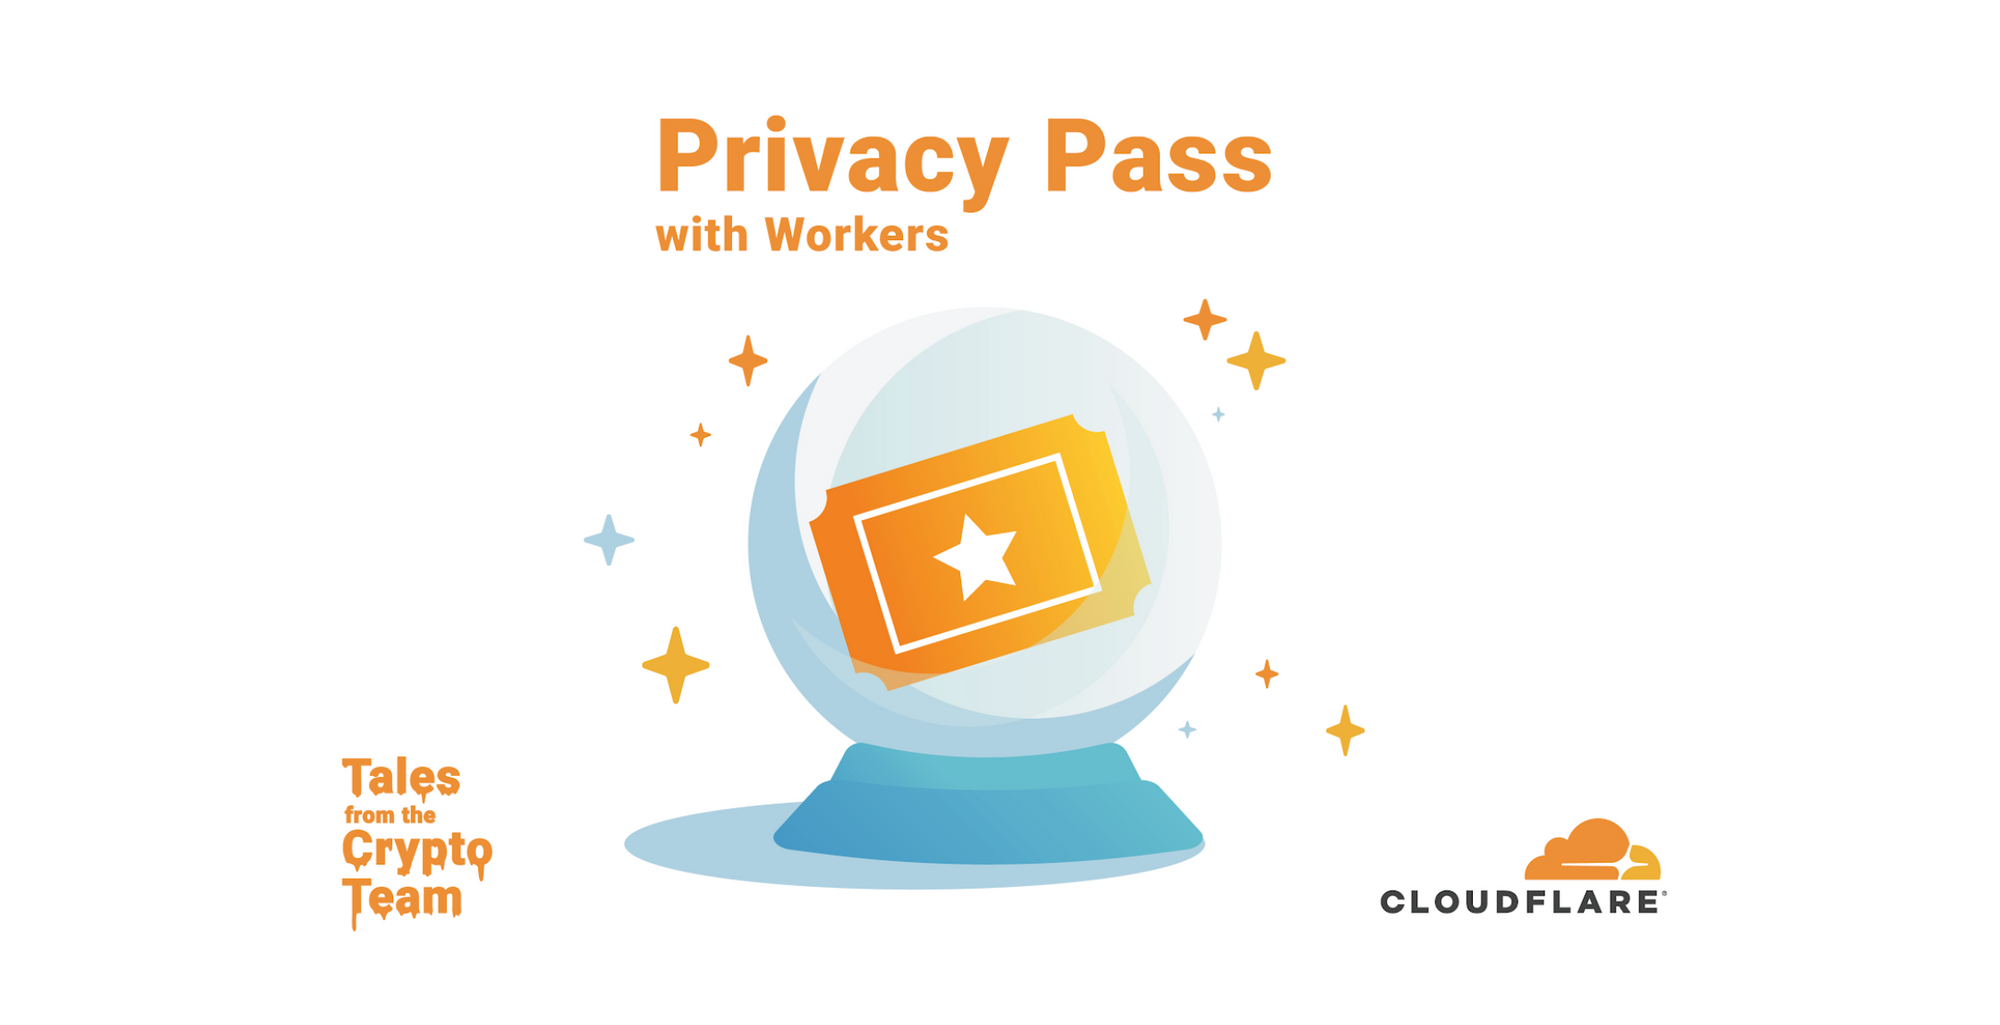 Supporting the latest version of the Privacy Pass Protocol